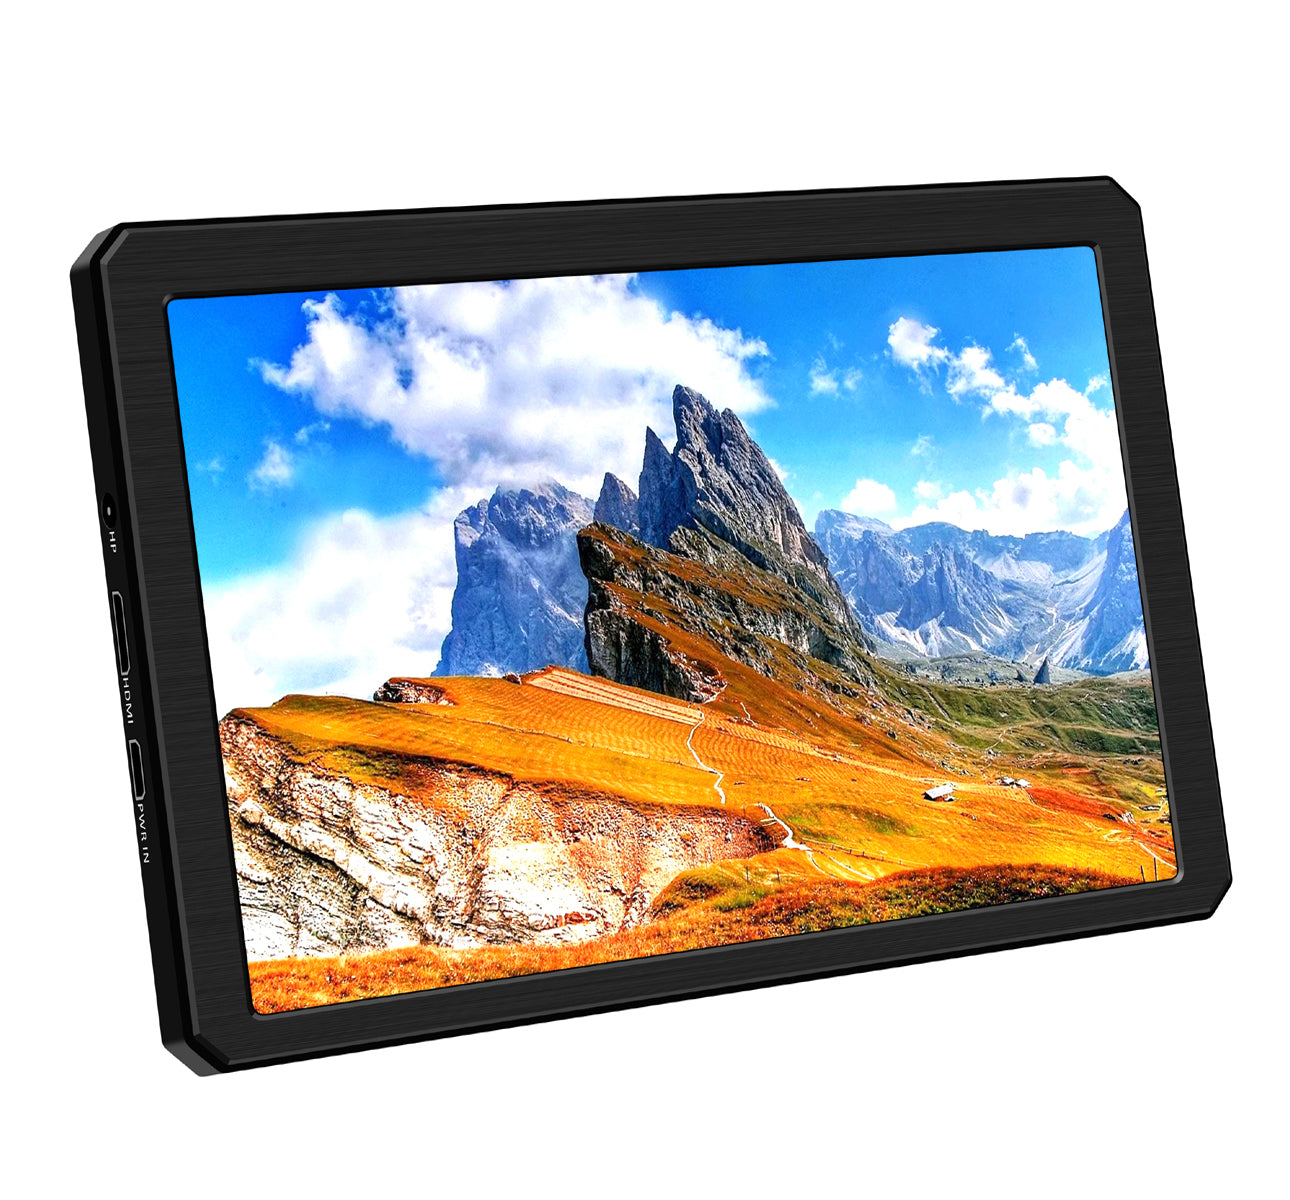 7 inch 1280 x 800 IPS Portable Monitor with Hdmi Input,USB Powered,Outdoor readable,Bulit in Speakers,CNC Shell with Stand(C007-2)